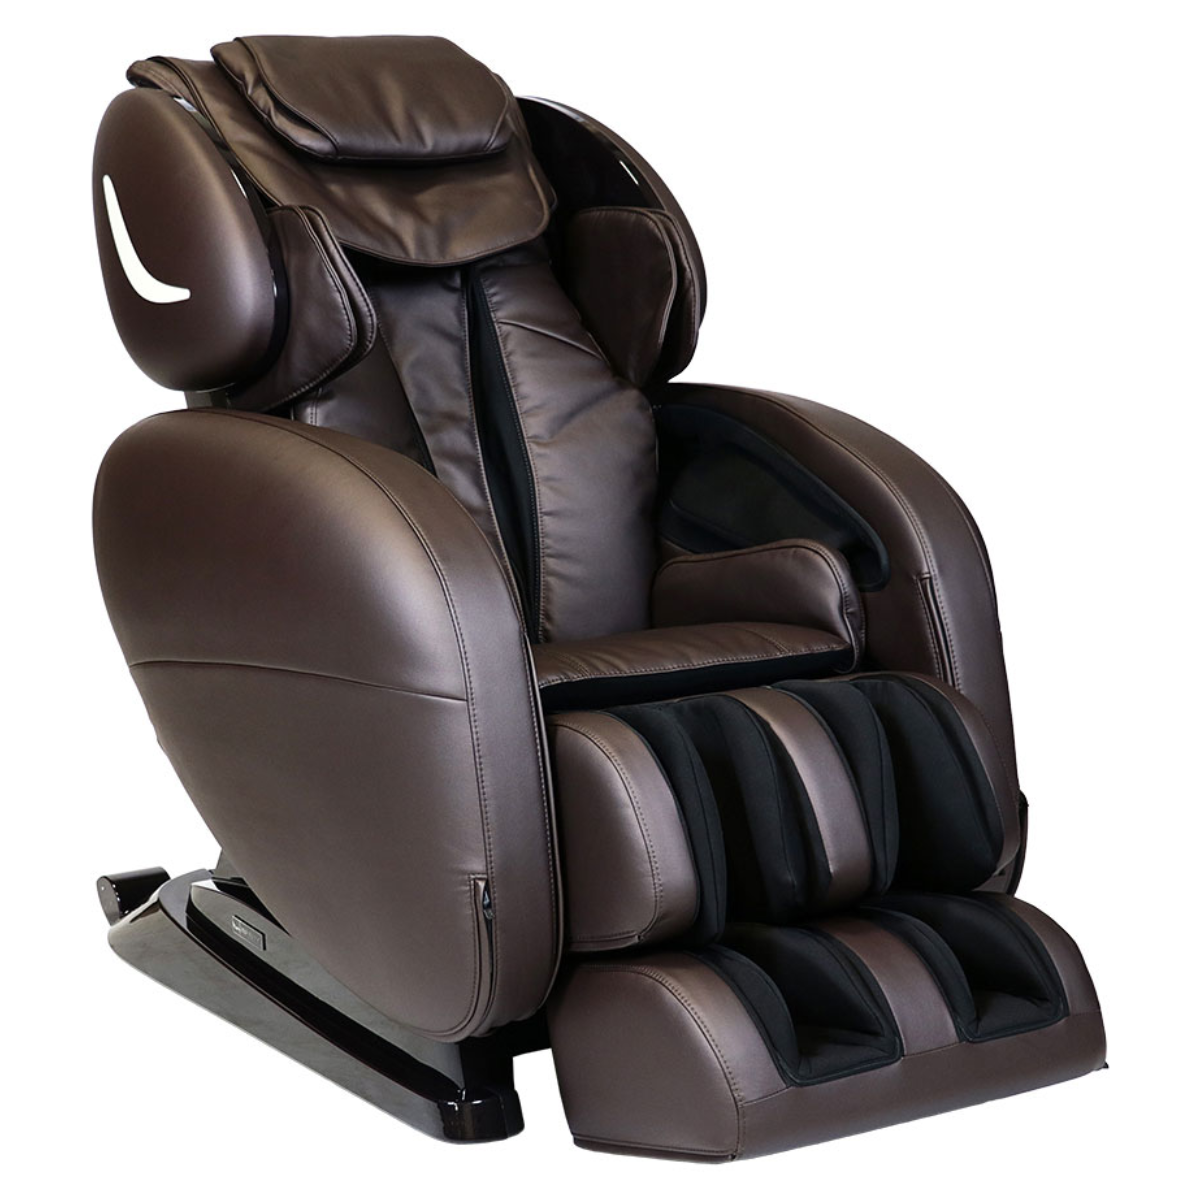 Infinity Smart Chair X3 3D/4D Massage Chair in Brown - Home Bars USA